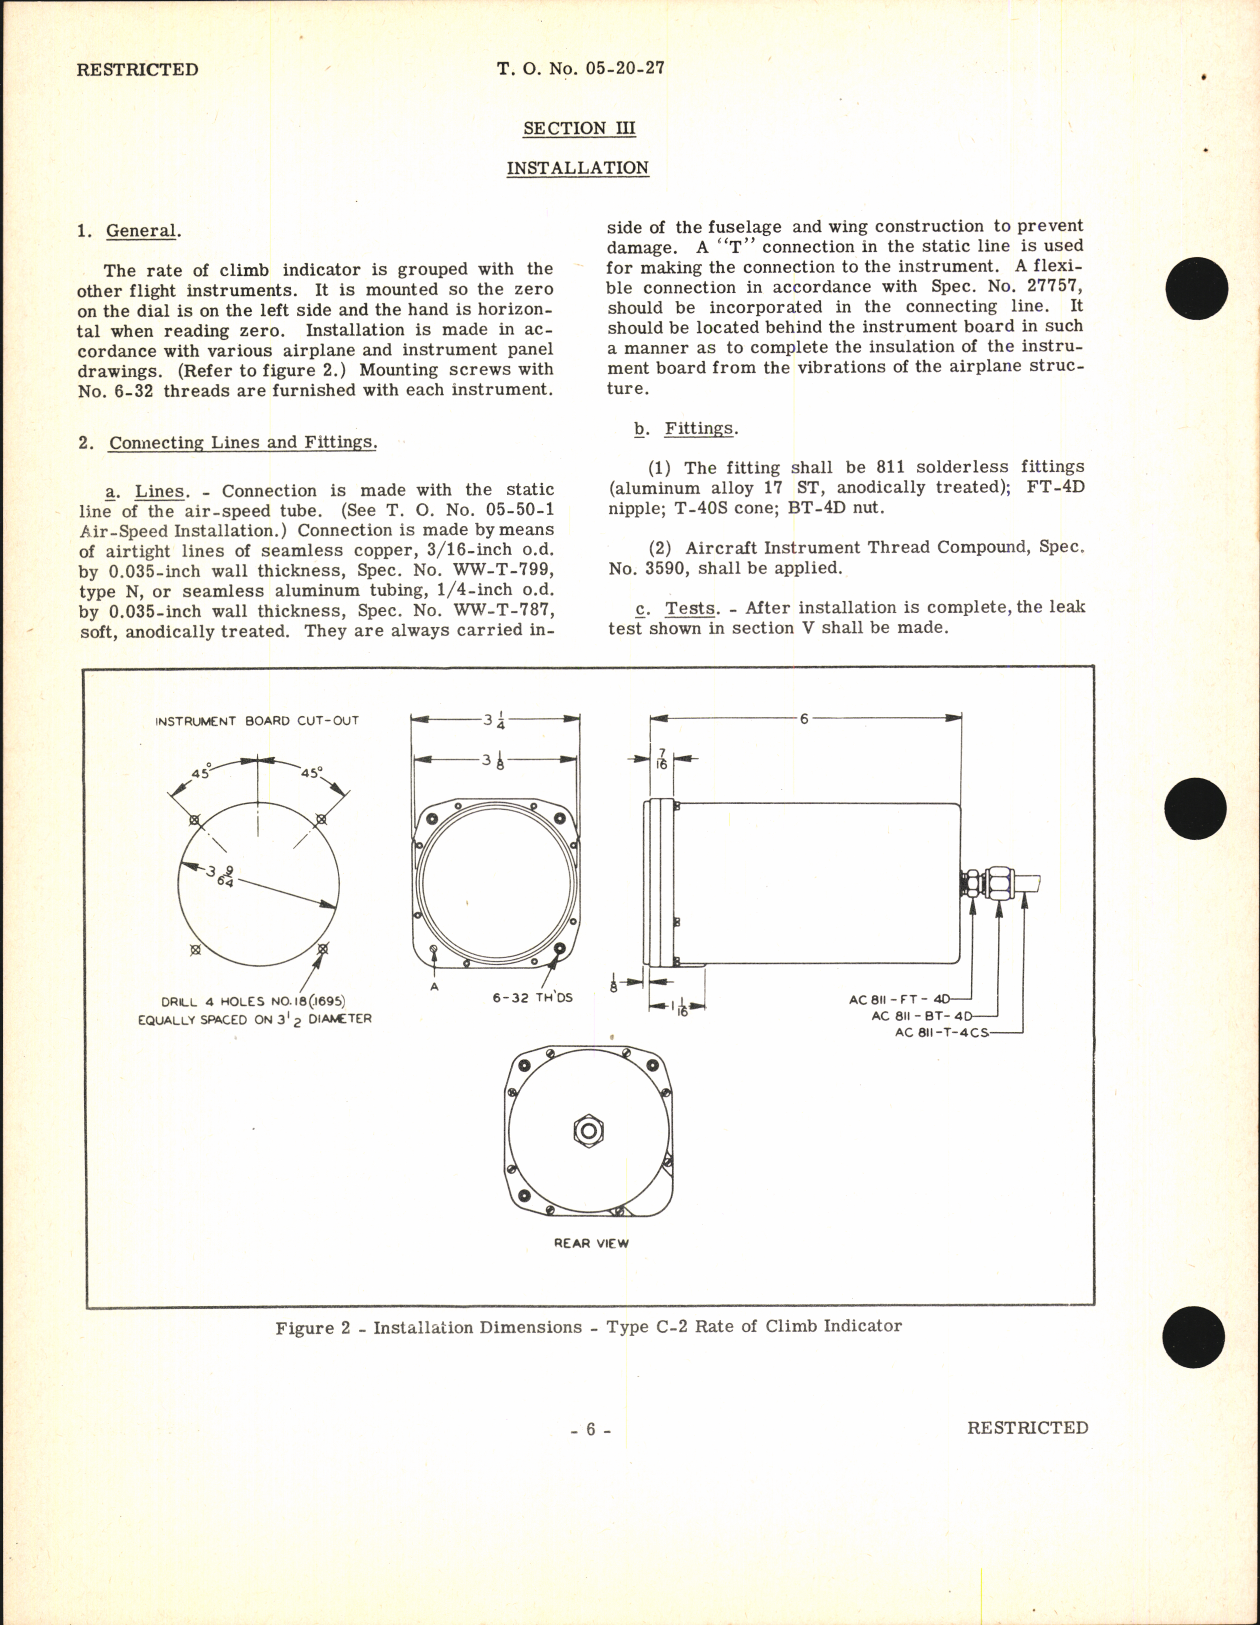 Sample page 8 from AirCorps Library document: Handbook of Instructions with Parts Catalog for Type C-2 Rate of Climb Indicator